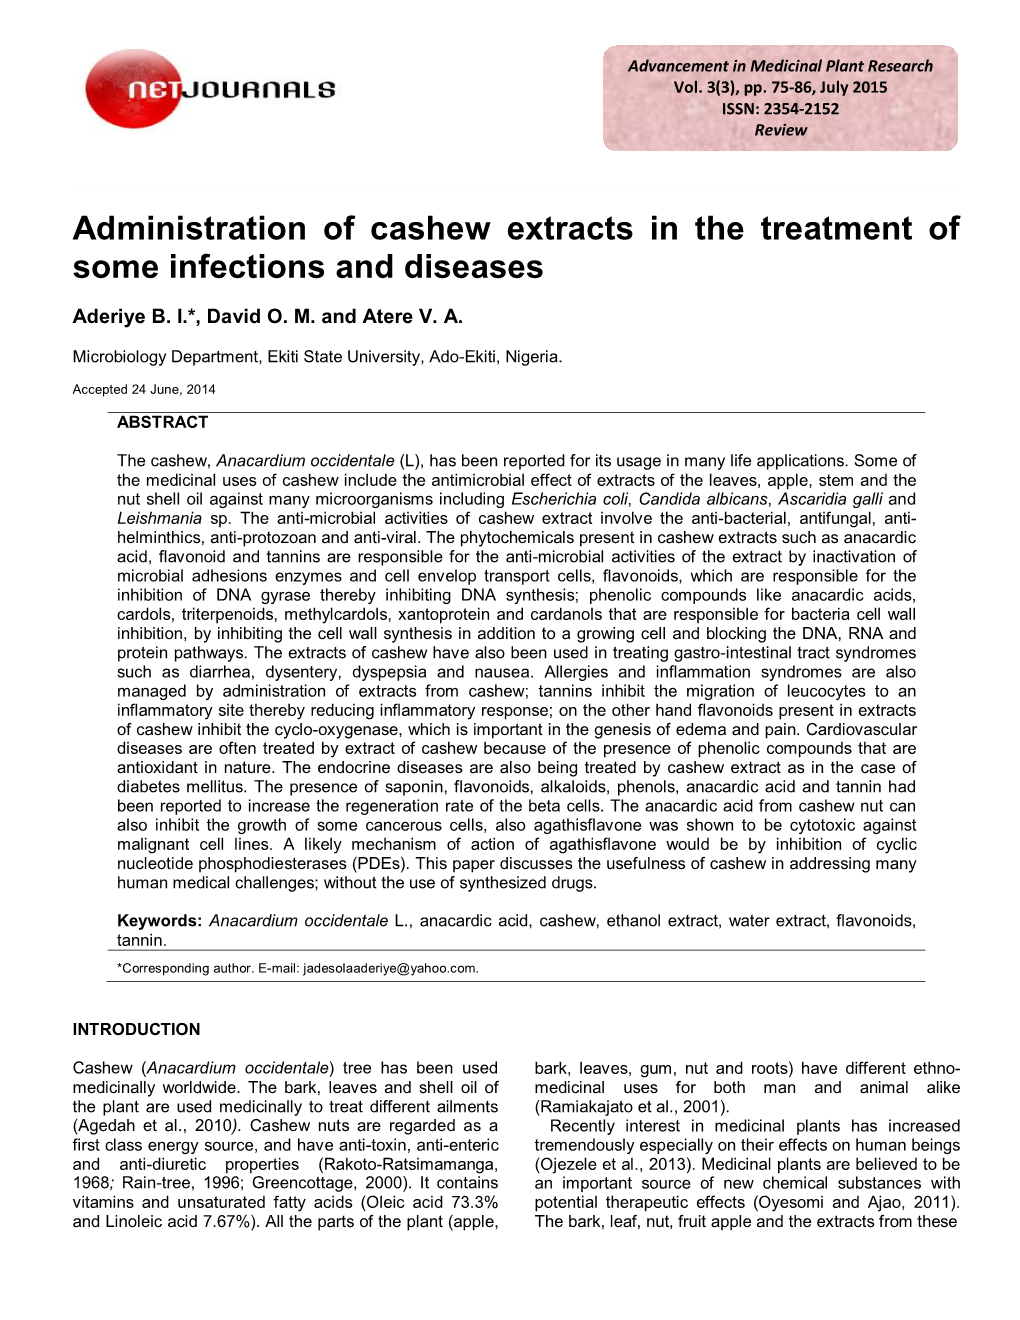 Administration of Cashew Extracts in the Treatment of Some Infections and Diseases